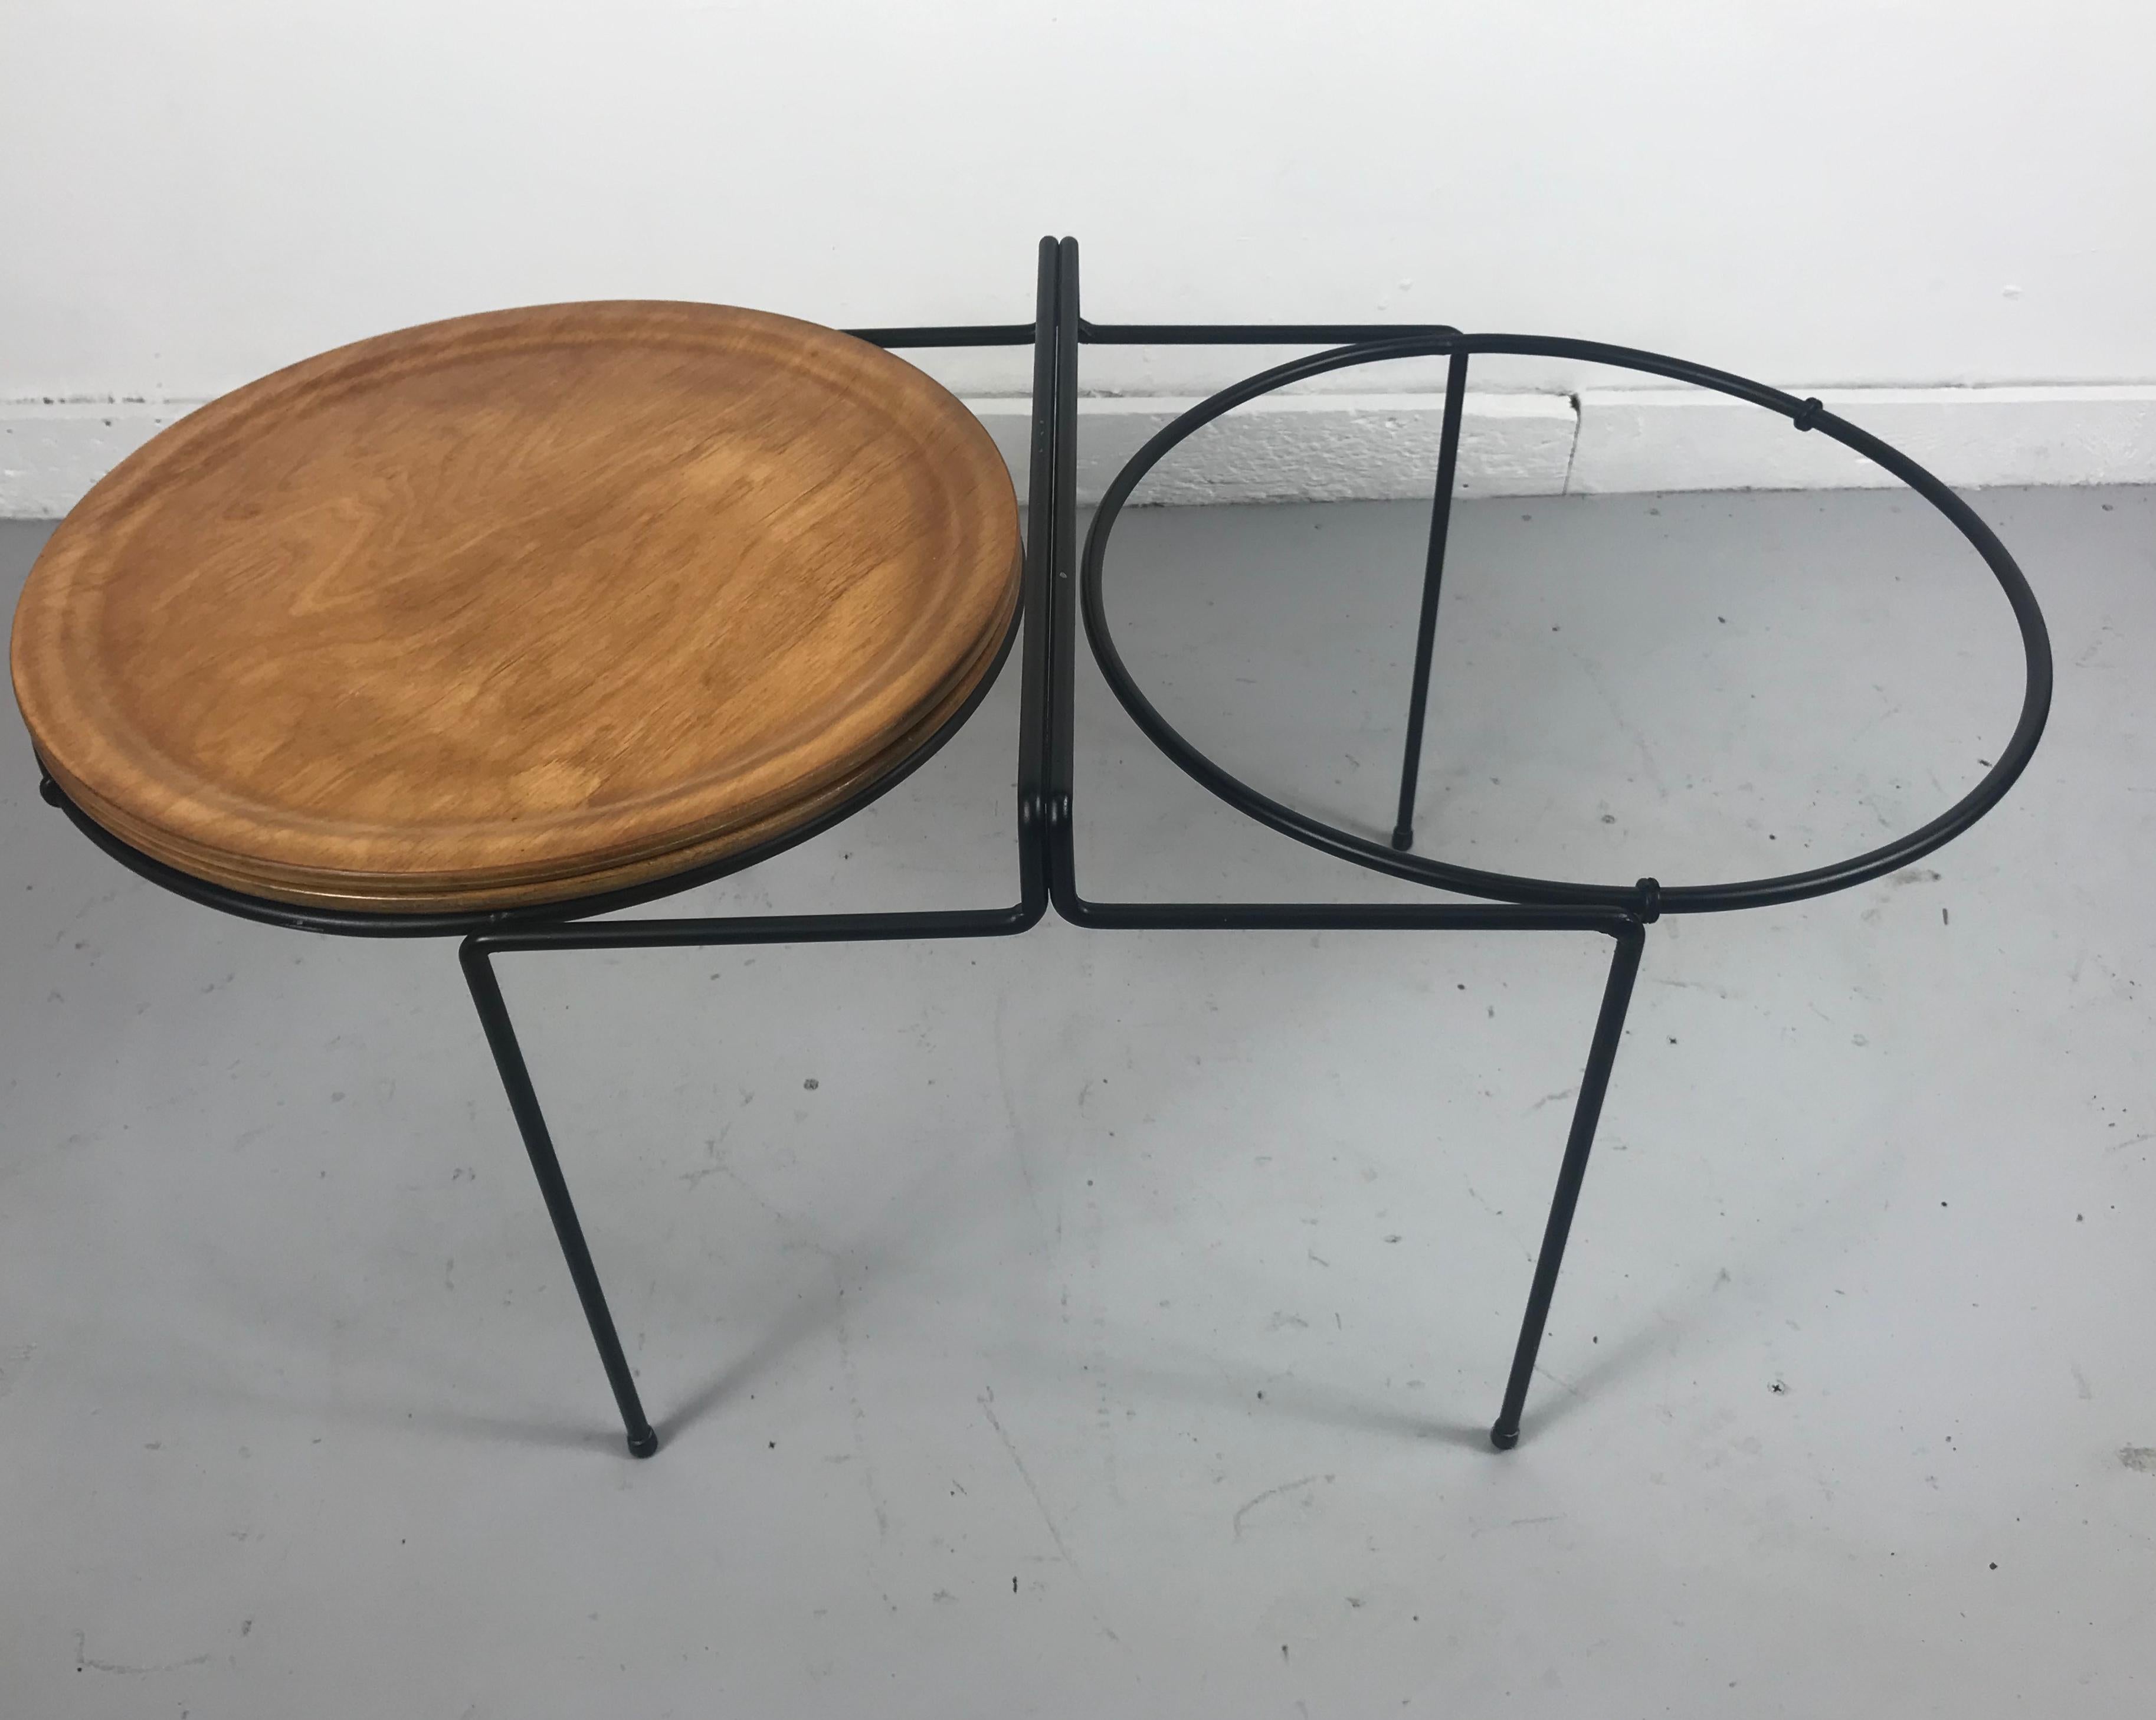 American Rare Mid-Century Modern Cocktail Tray Table 